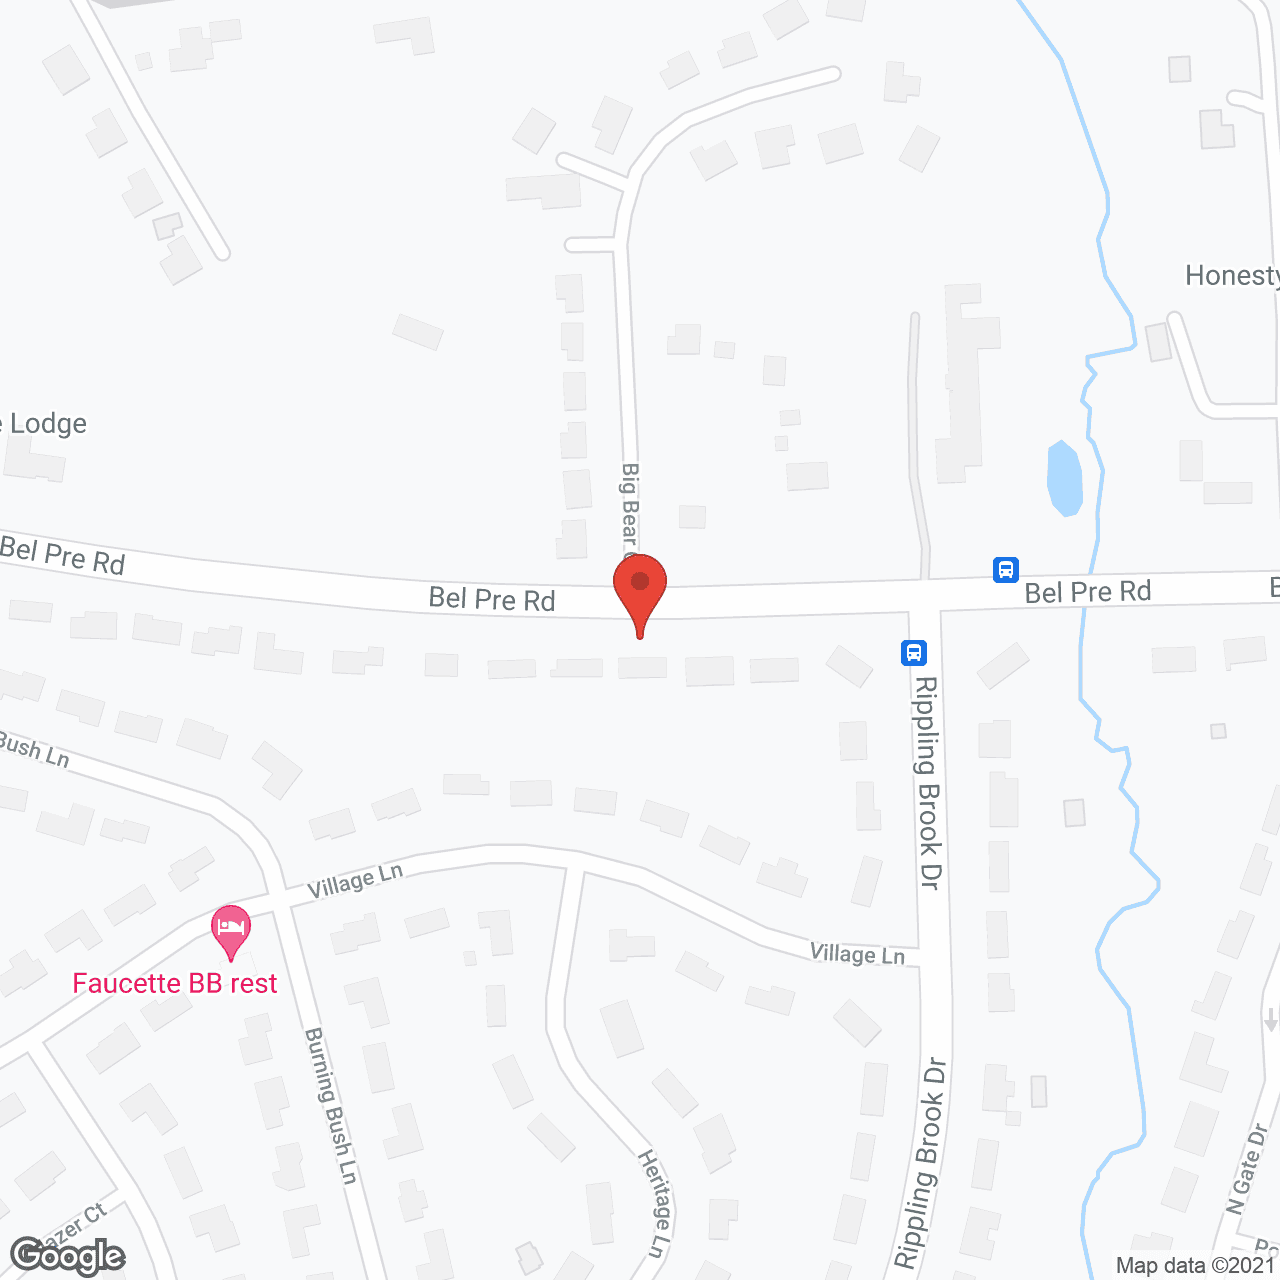 An An Assisted Living in google map